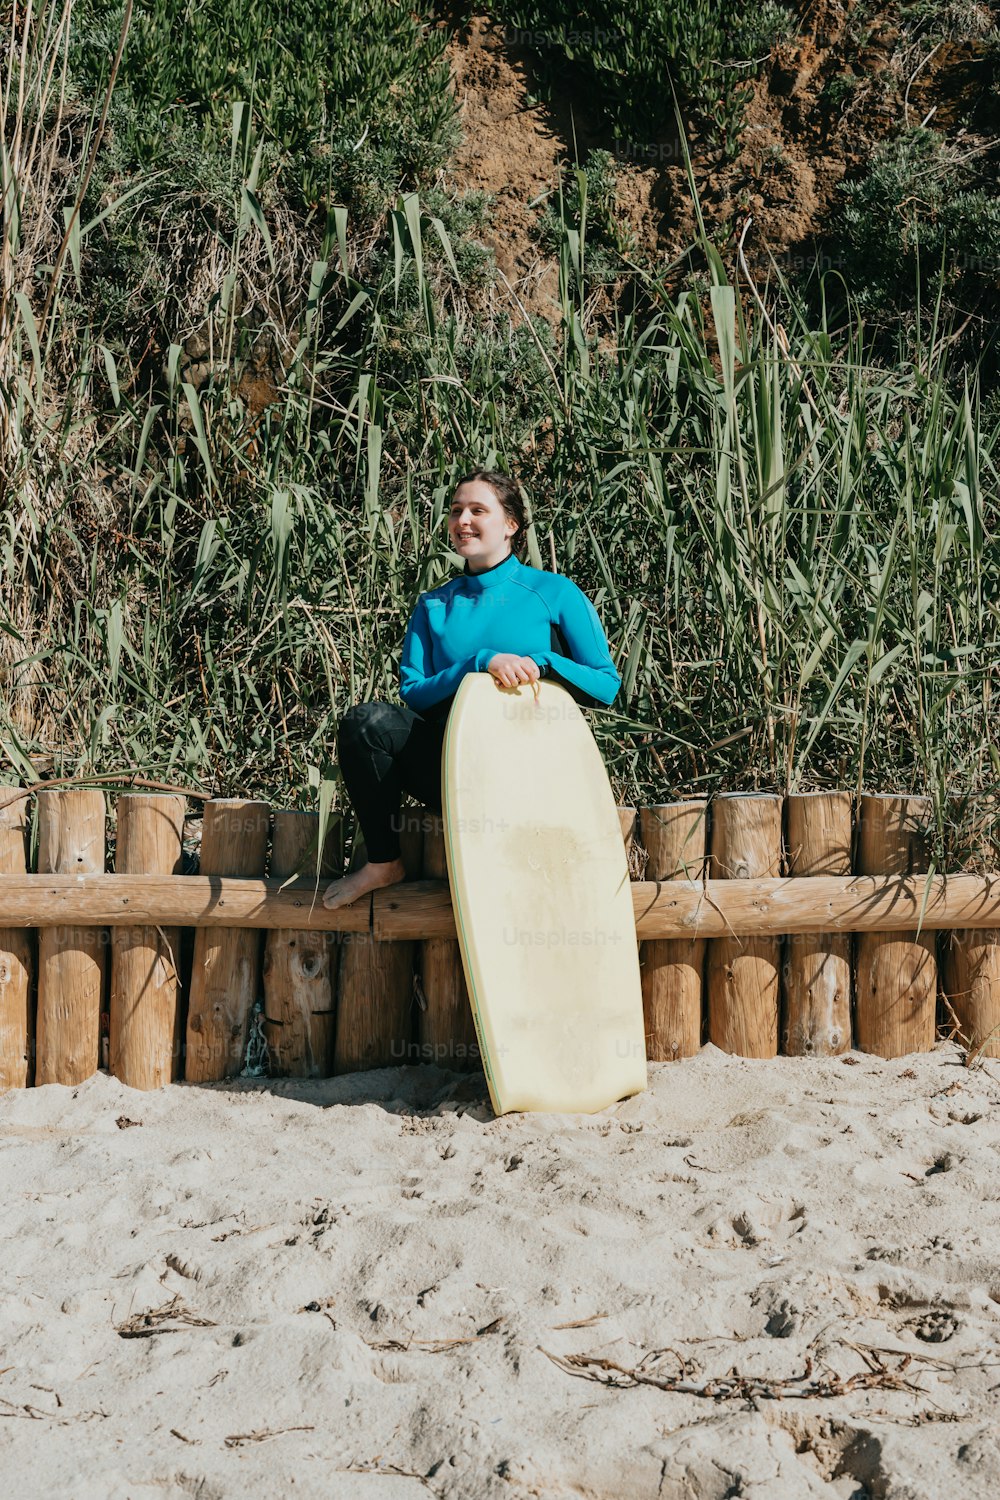 a man sitting on a wooden bench holding a surfboard